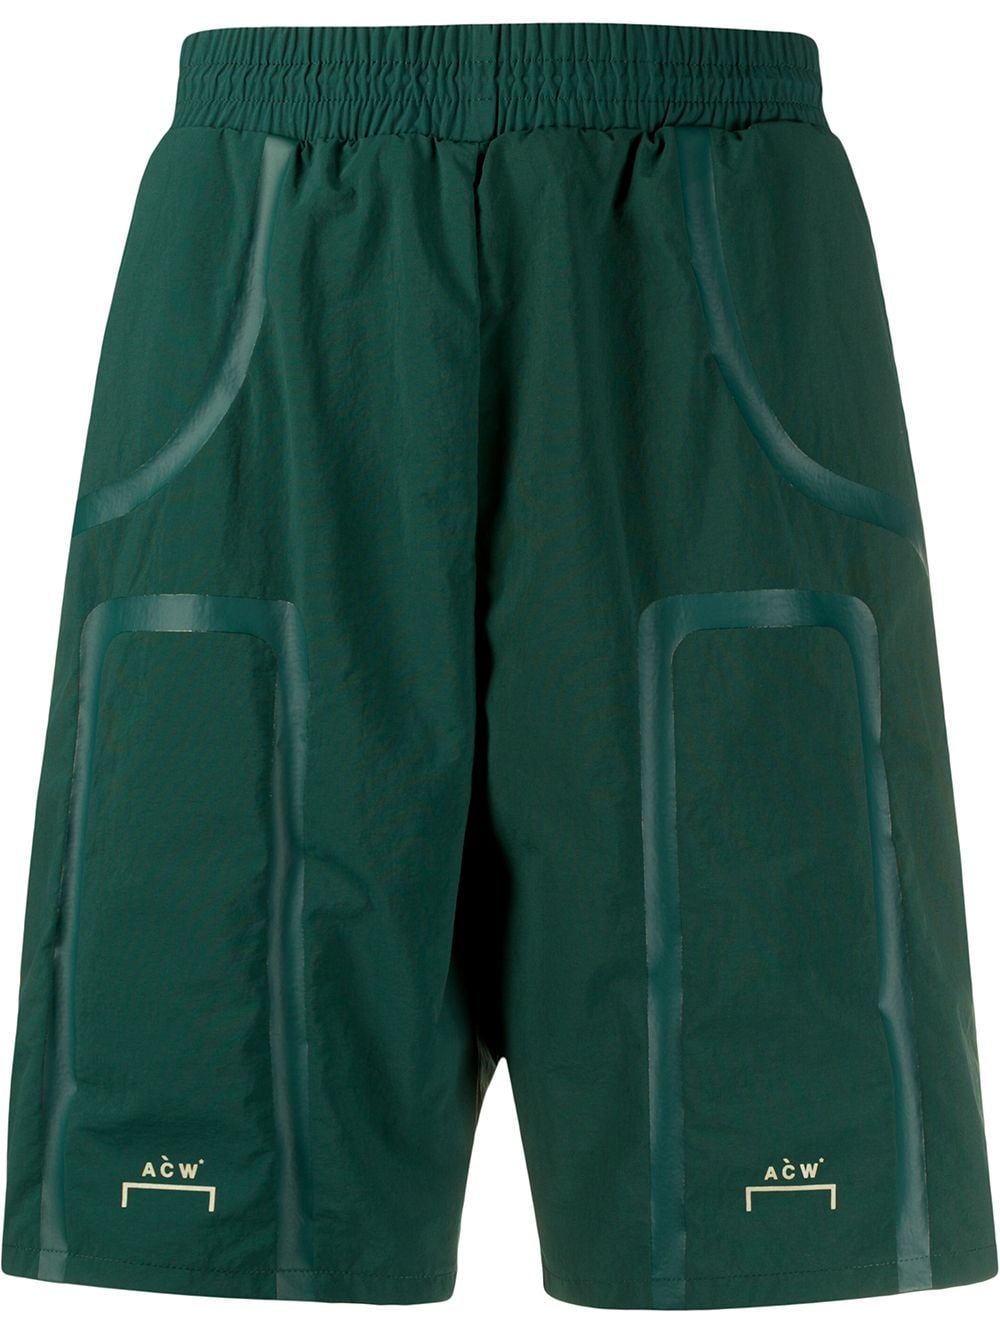 A-COLD-WALL* Bracket Taped shorts - Green von A-COLD-WALL*